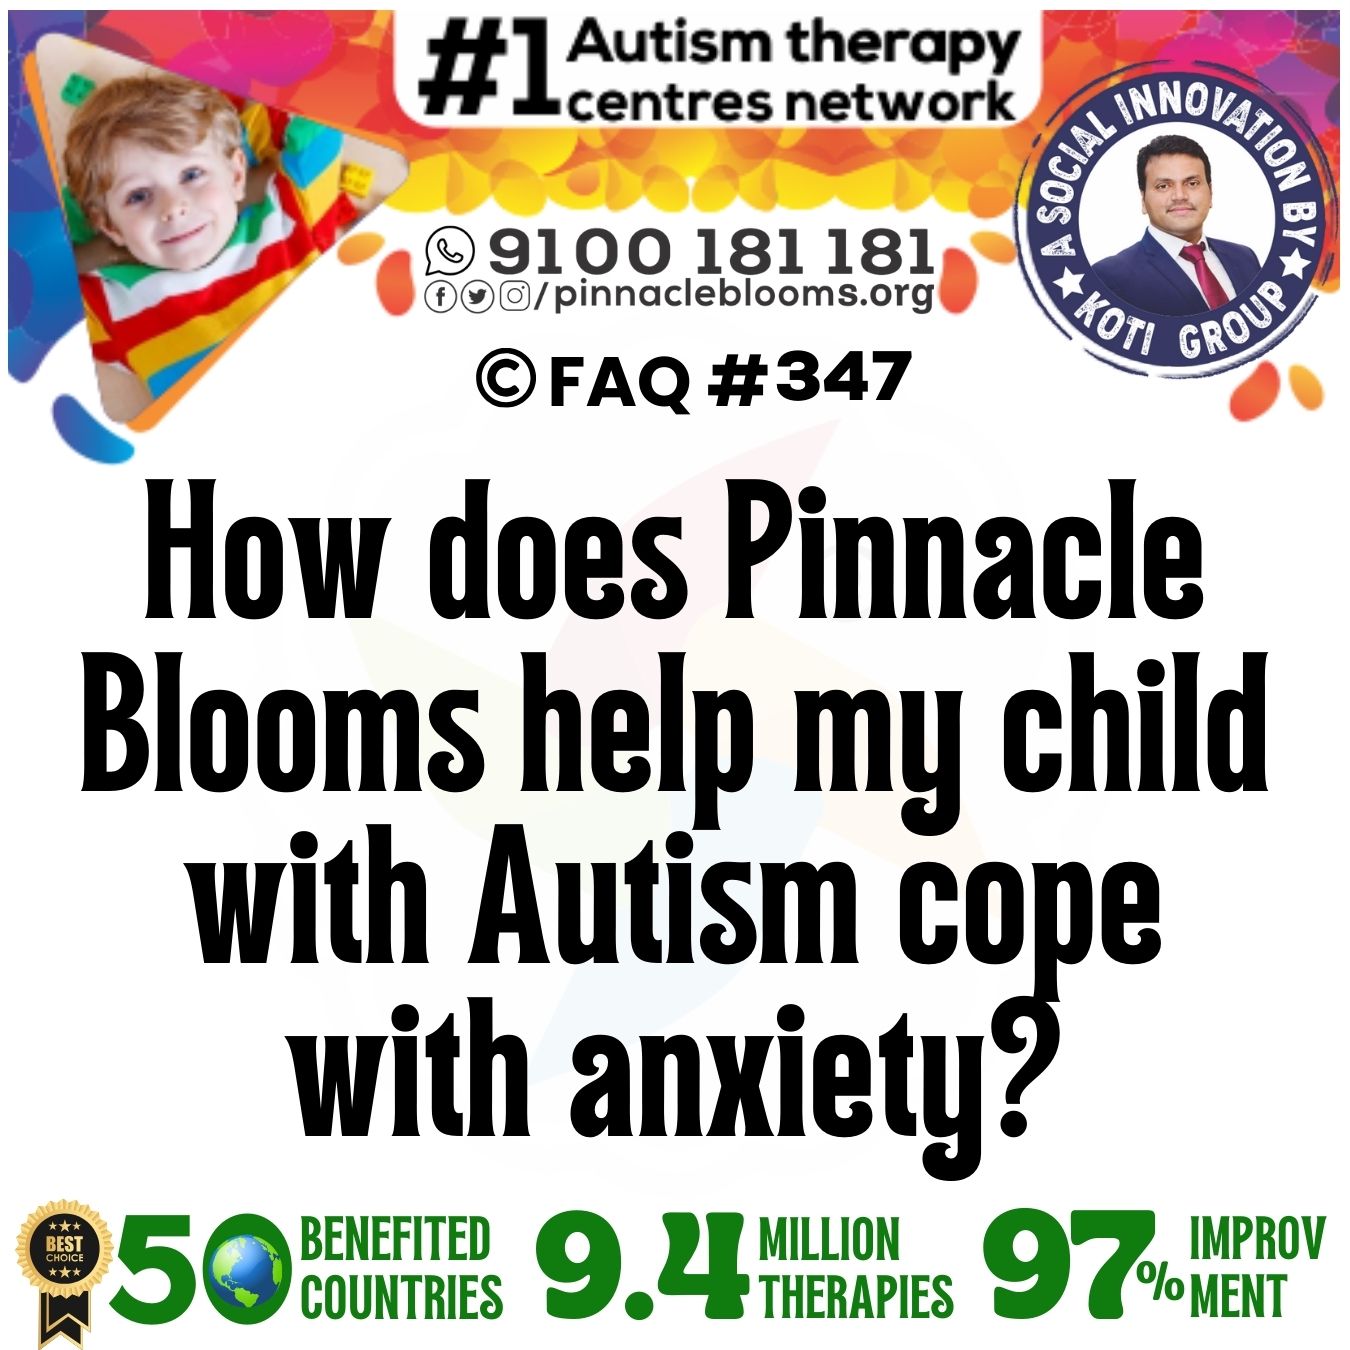 How does Pinnacle Blooms help my child with Autism cope with anxiety?